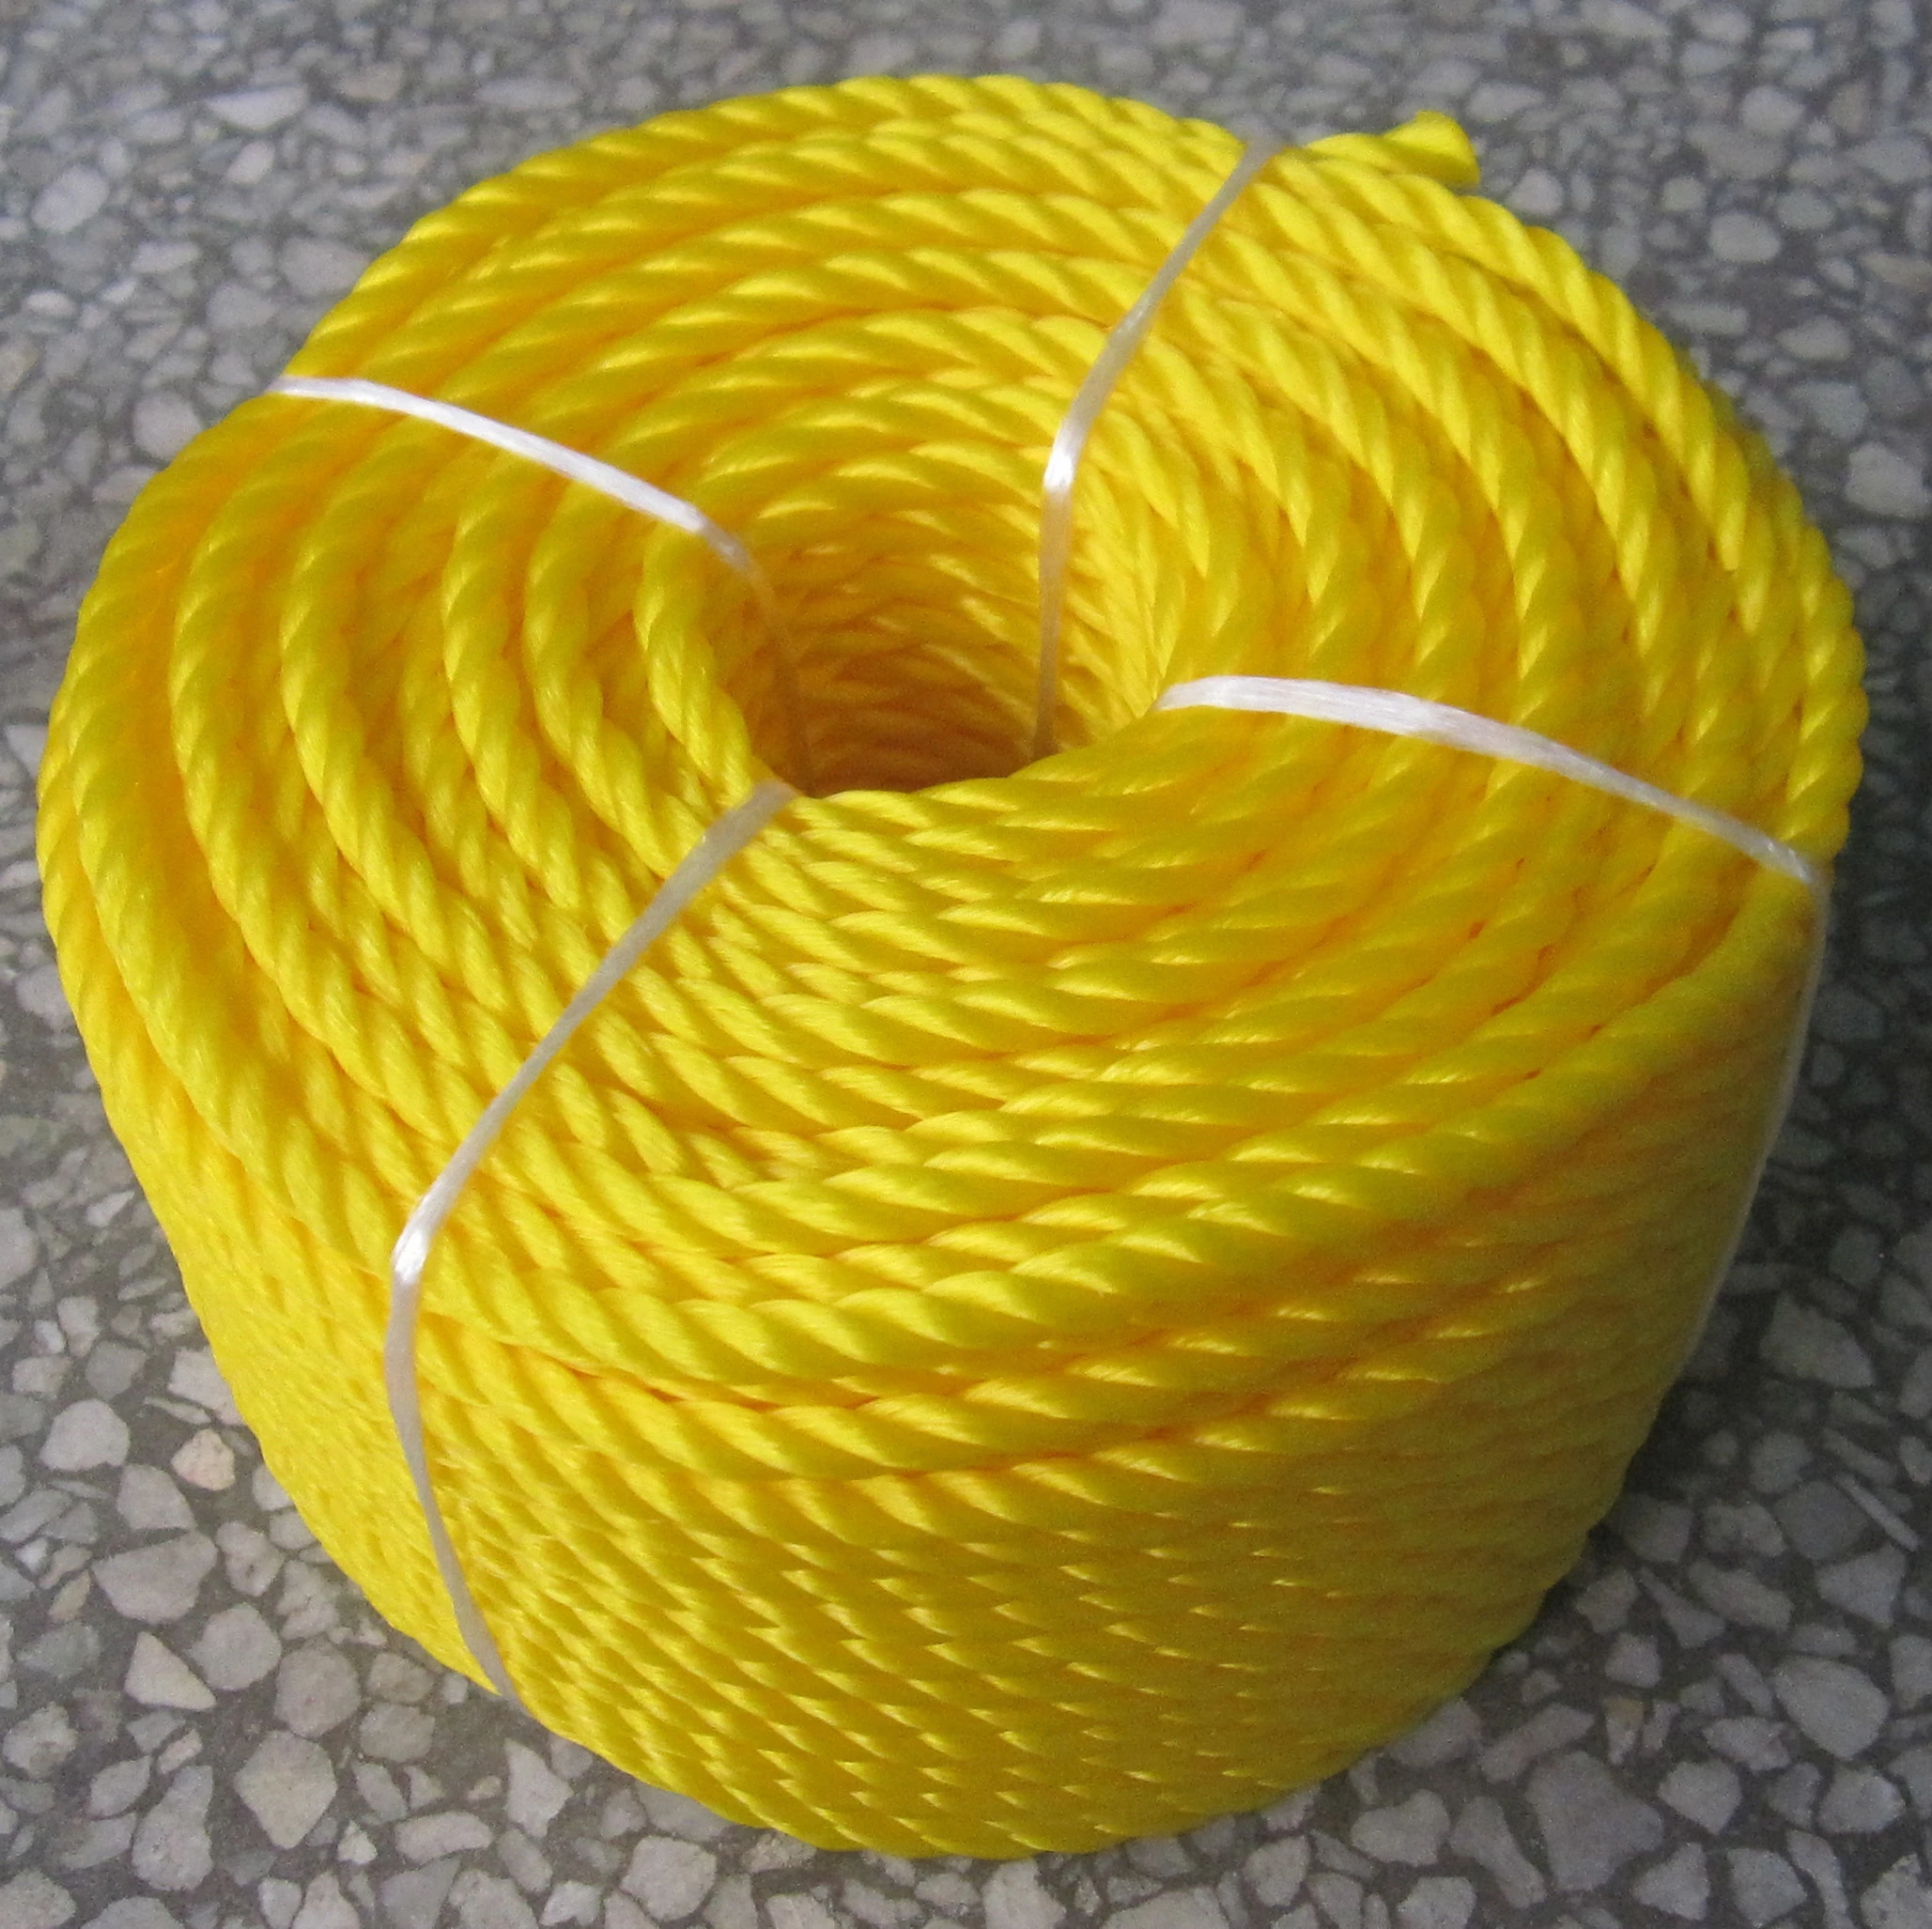 Buy 6mm Cheap Price 100% Virgin Pp Nylon Rope 3 Strands Twisted Pe Boat Rope  For Africa from Unique Cordage Co., Ltd., China